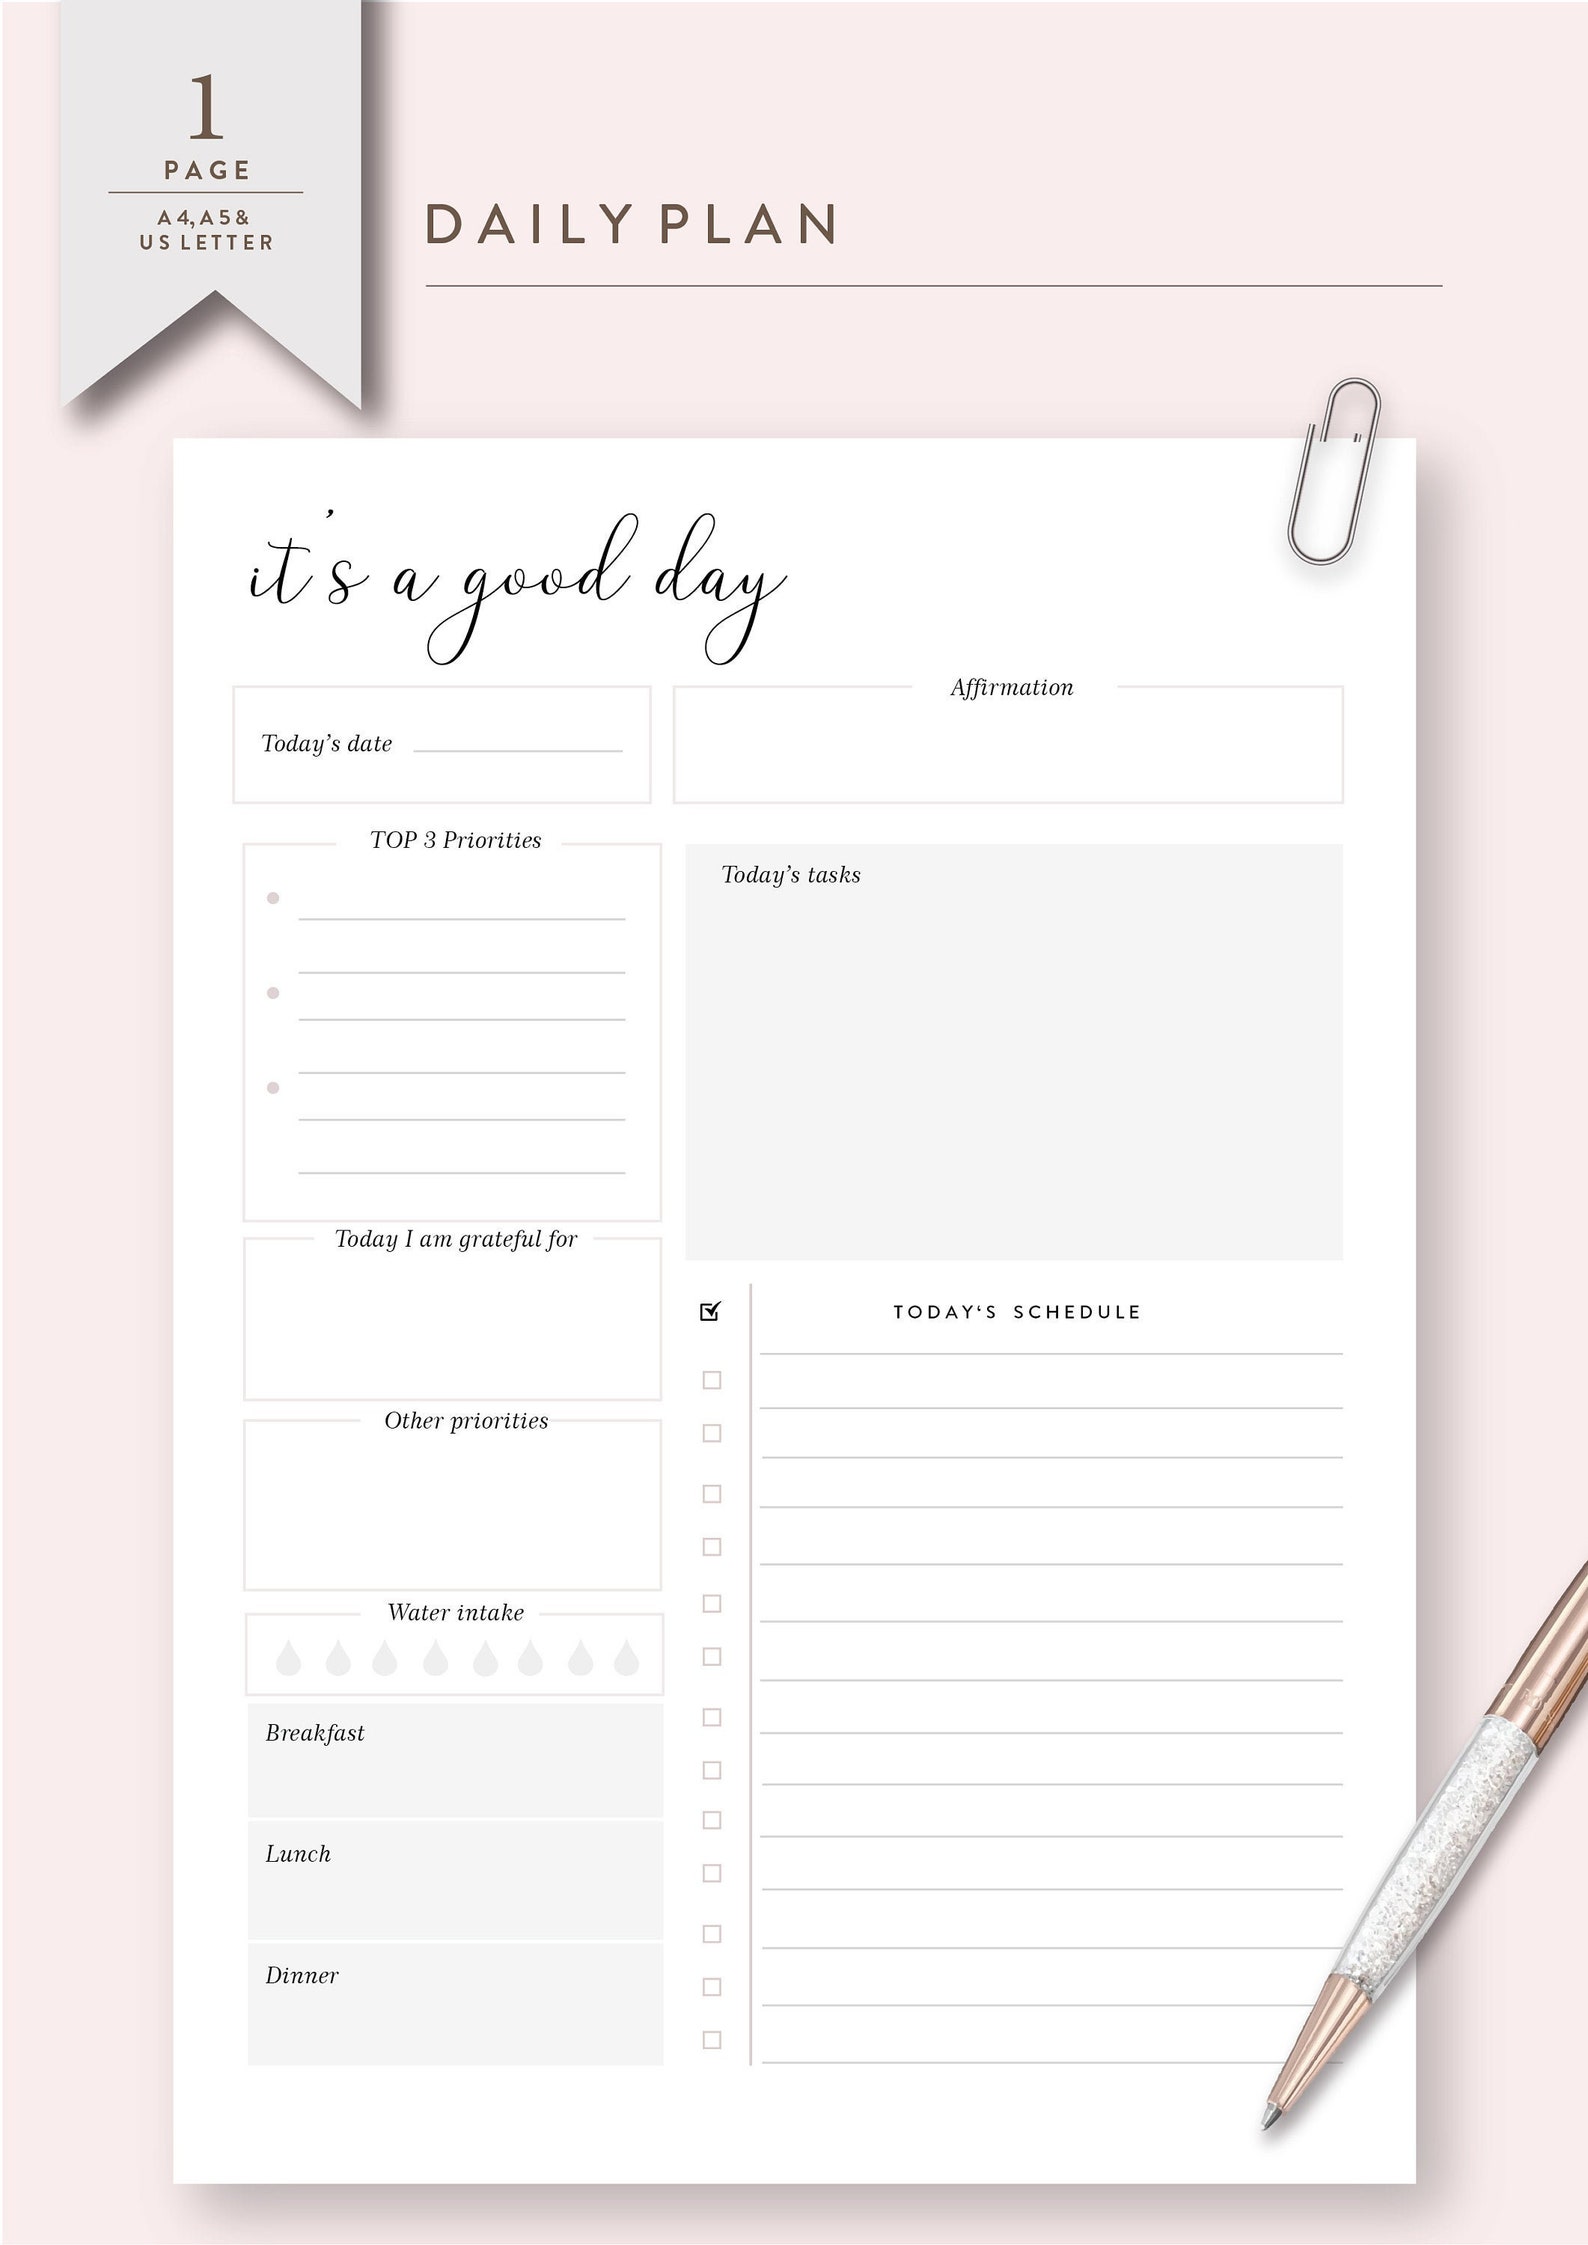 Printable Planner Daily Planner to Print Out Planner | Etsy